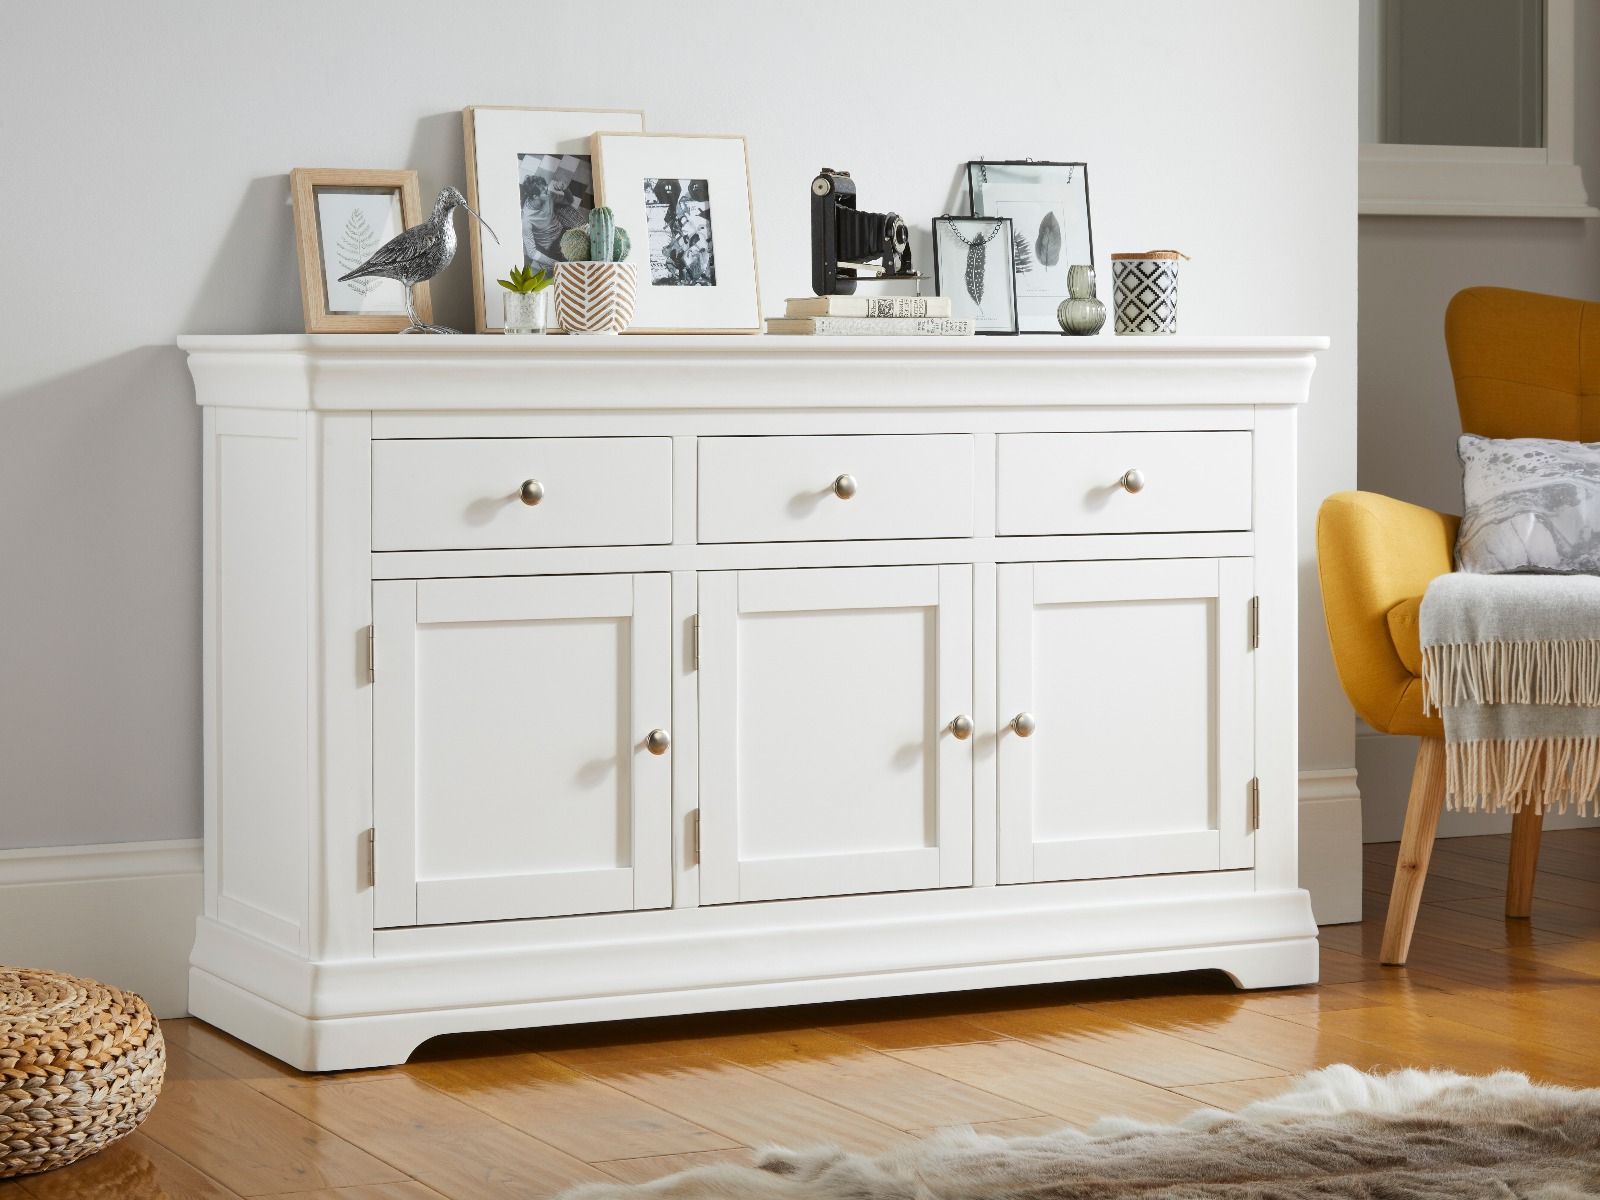 Toulouse 140cm Large White Painted Sideboard With Drawers | Fully Assembled With Regard To Gray Wooden Sideboards (View 15 of 20)